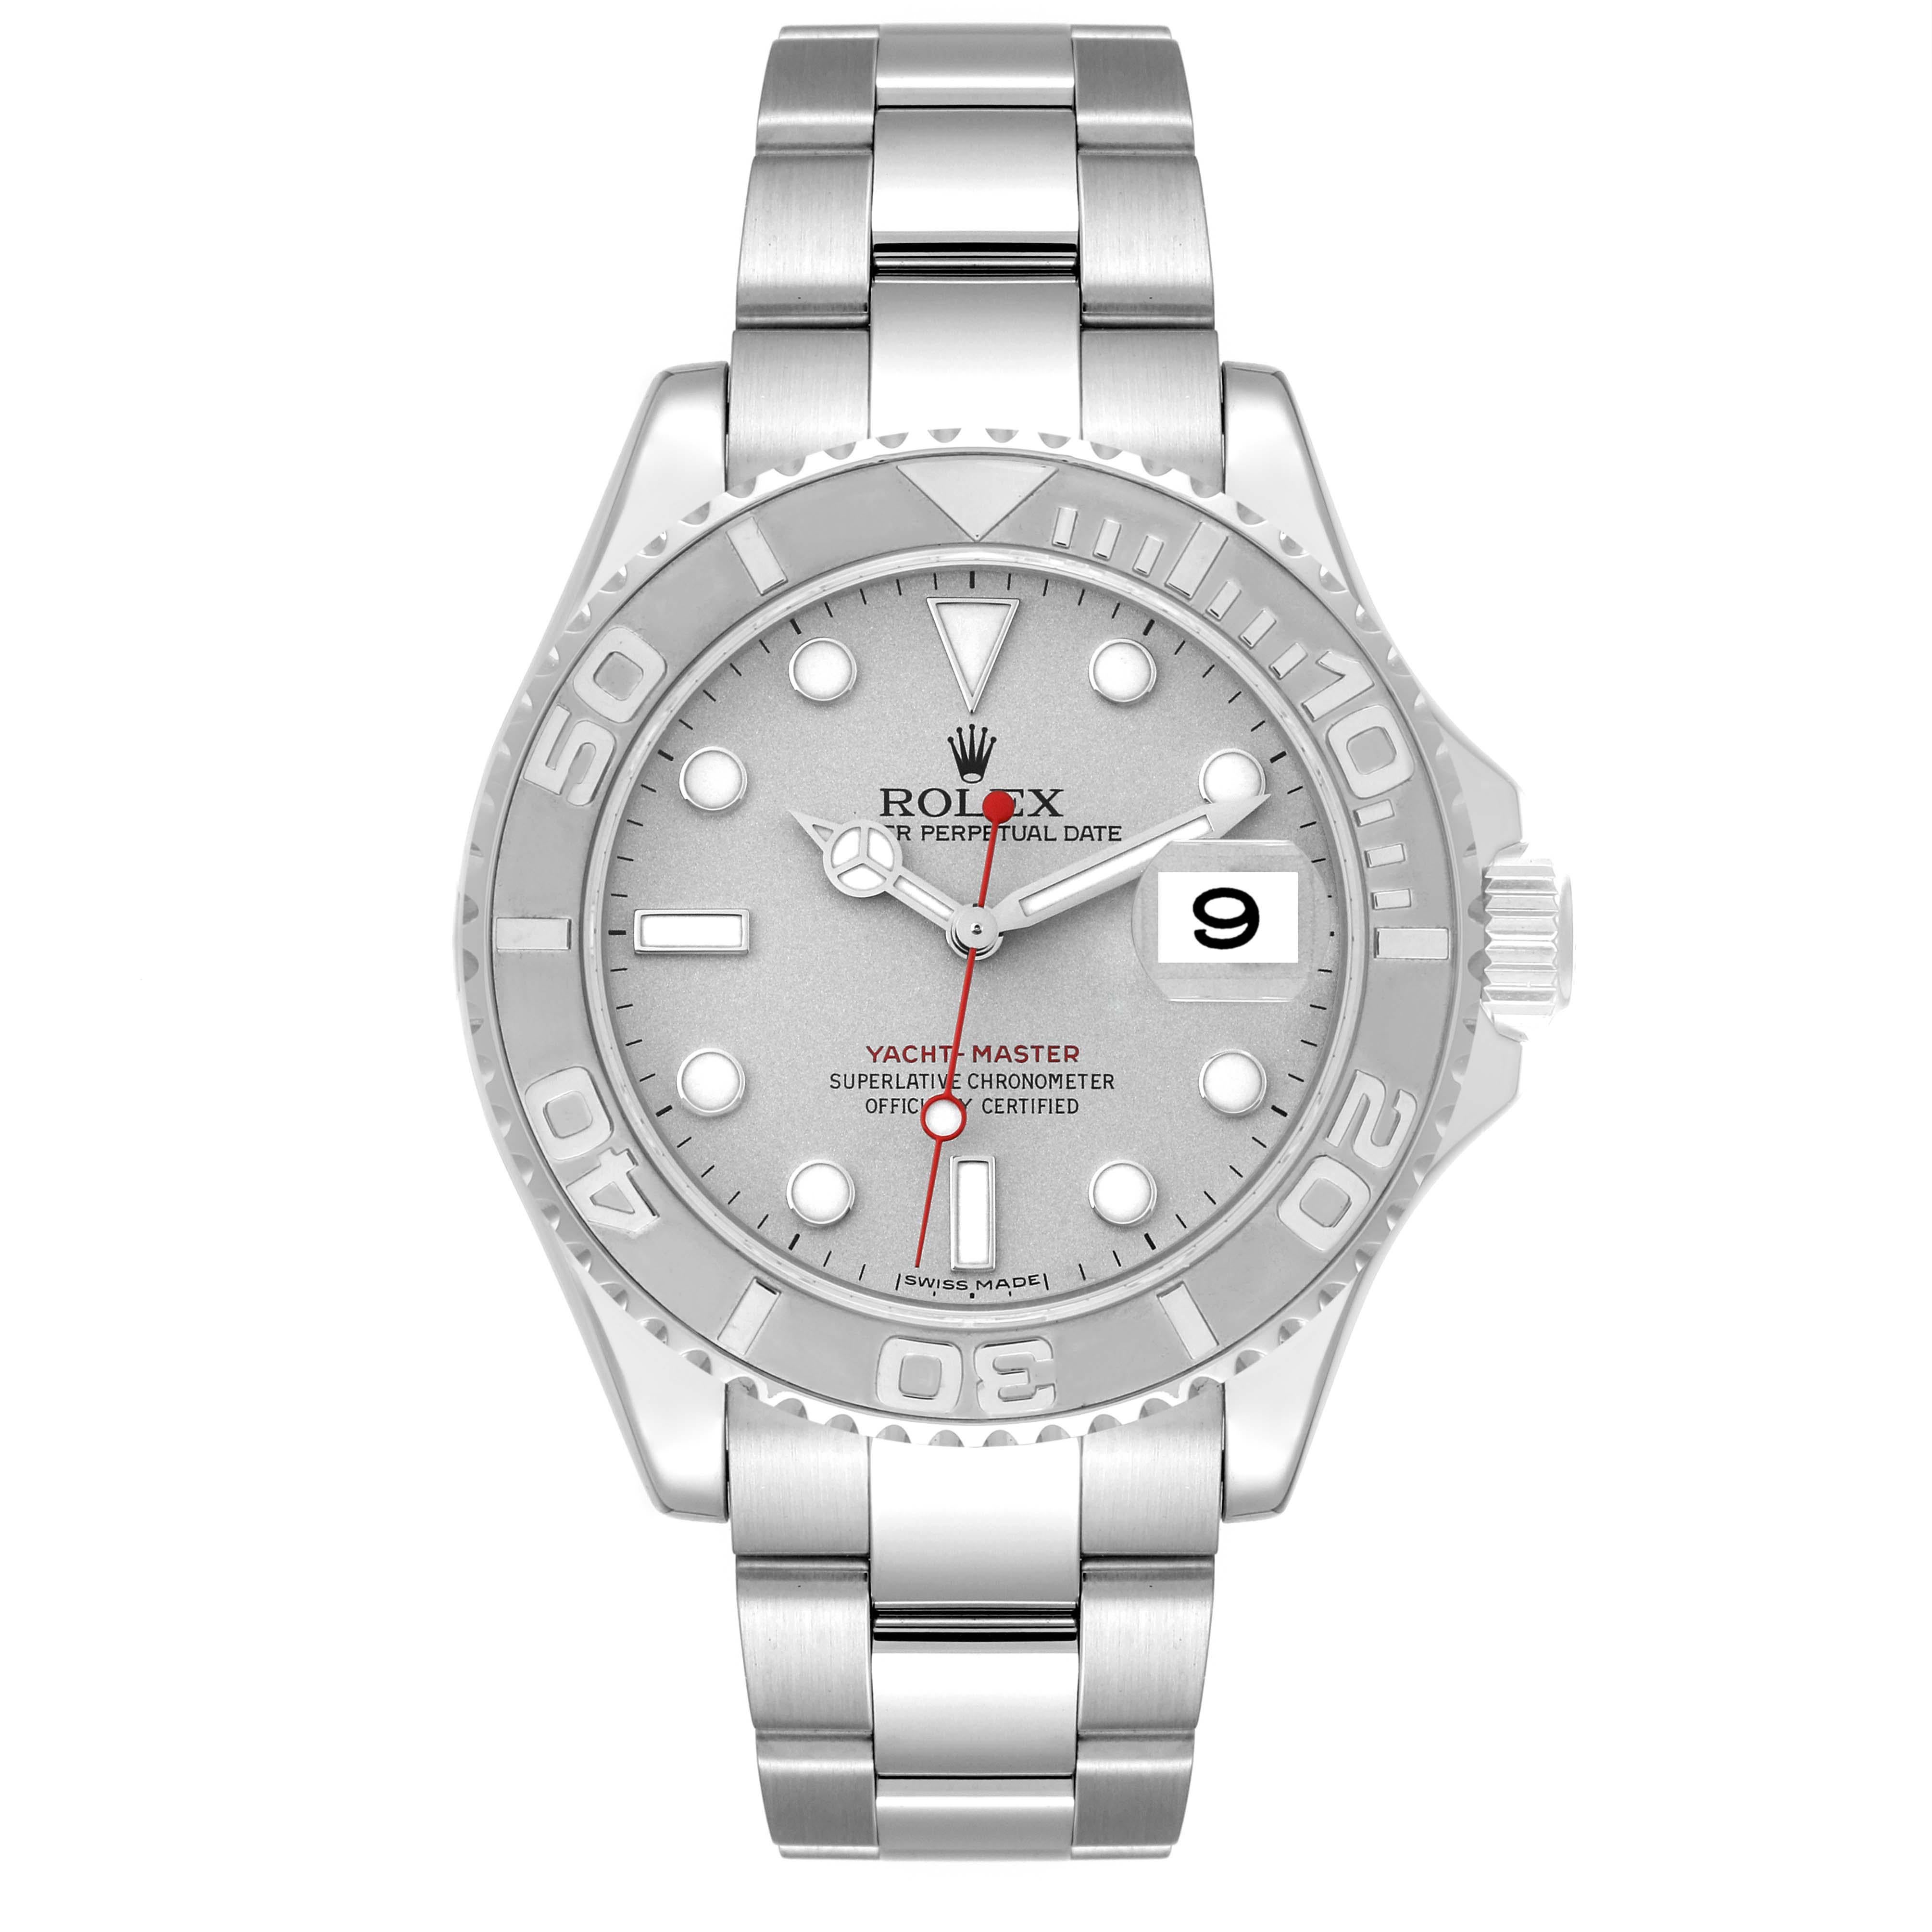 Rolex Yachtmaster Platinum Dial Bezel Steel Mens Watch 16622 Box Card. Officially certified chronometer automatic self-winding movement. Stainless steel case 40.0 mm in diameter. Rolex logo on the crown. Platinum special time-lapse bidirectional